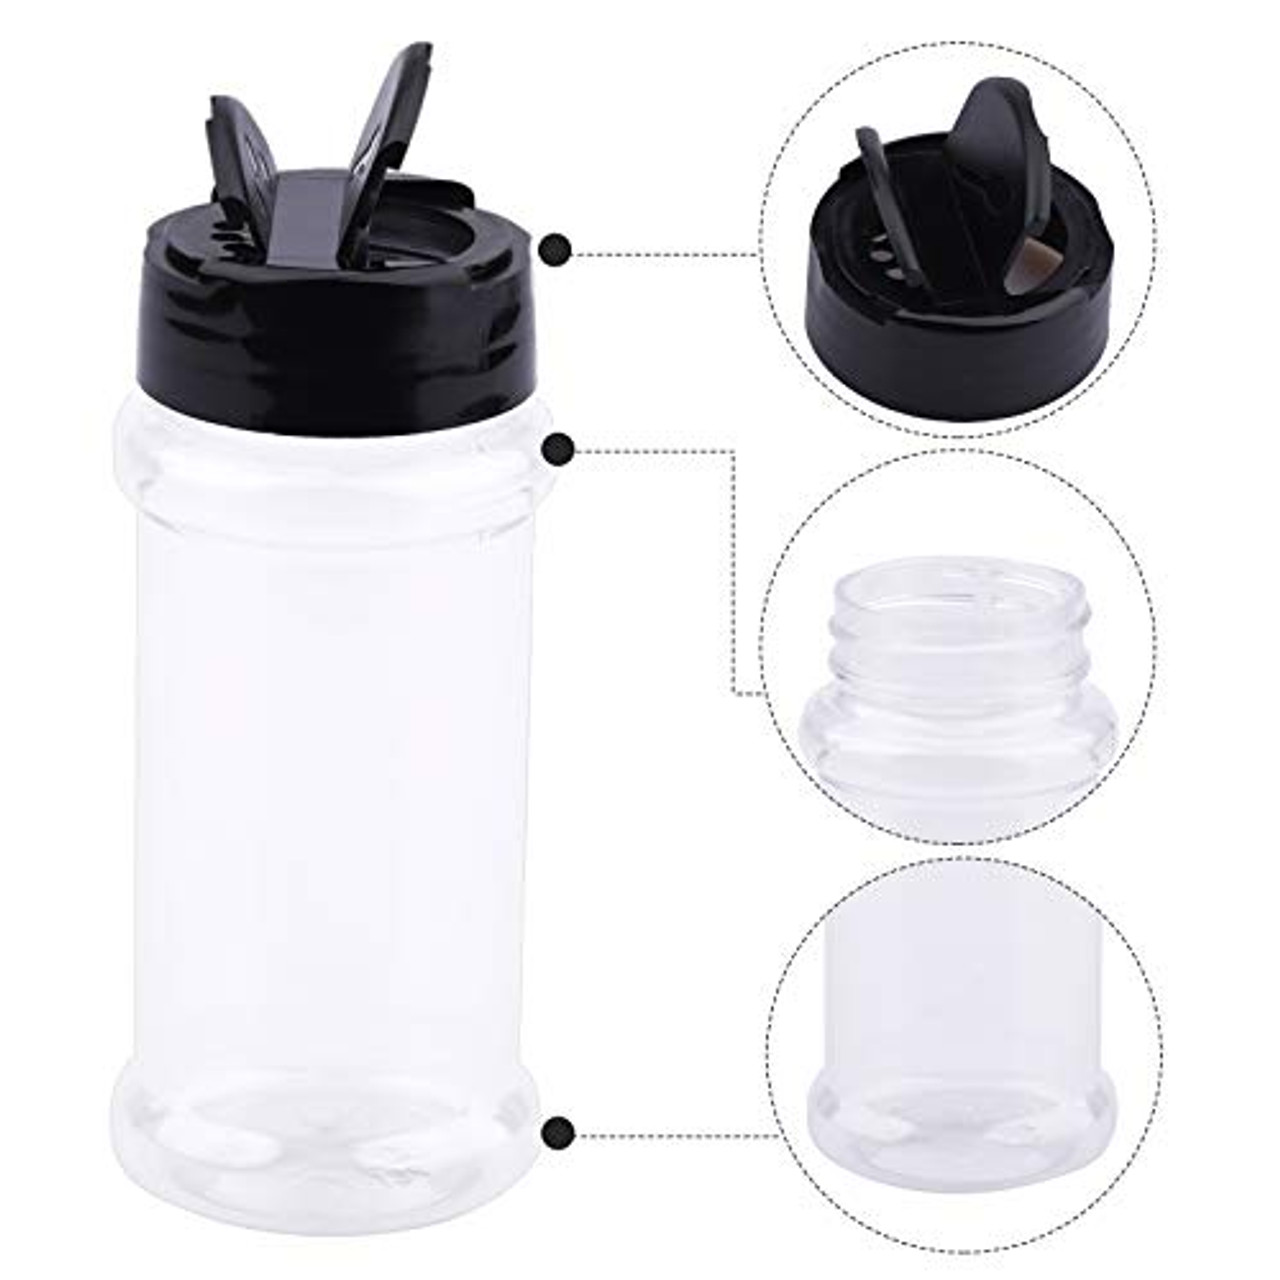 3 Pack Plastic Spice Jars / Bottles,Clear Spice Jar with Shaker